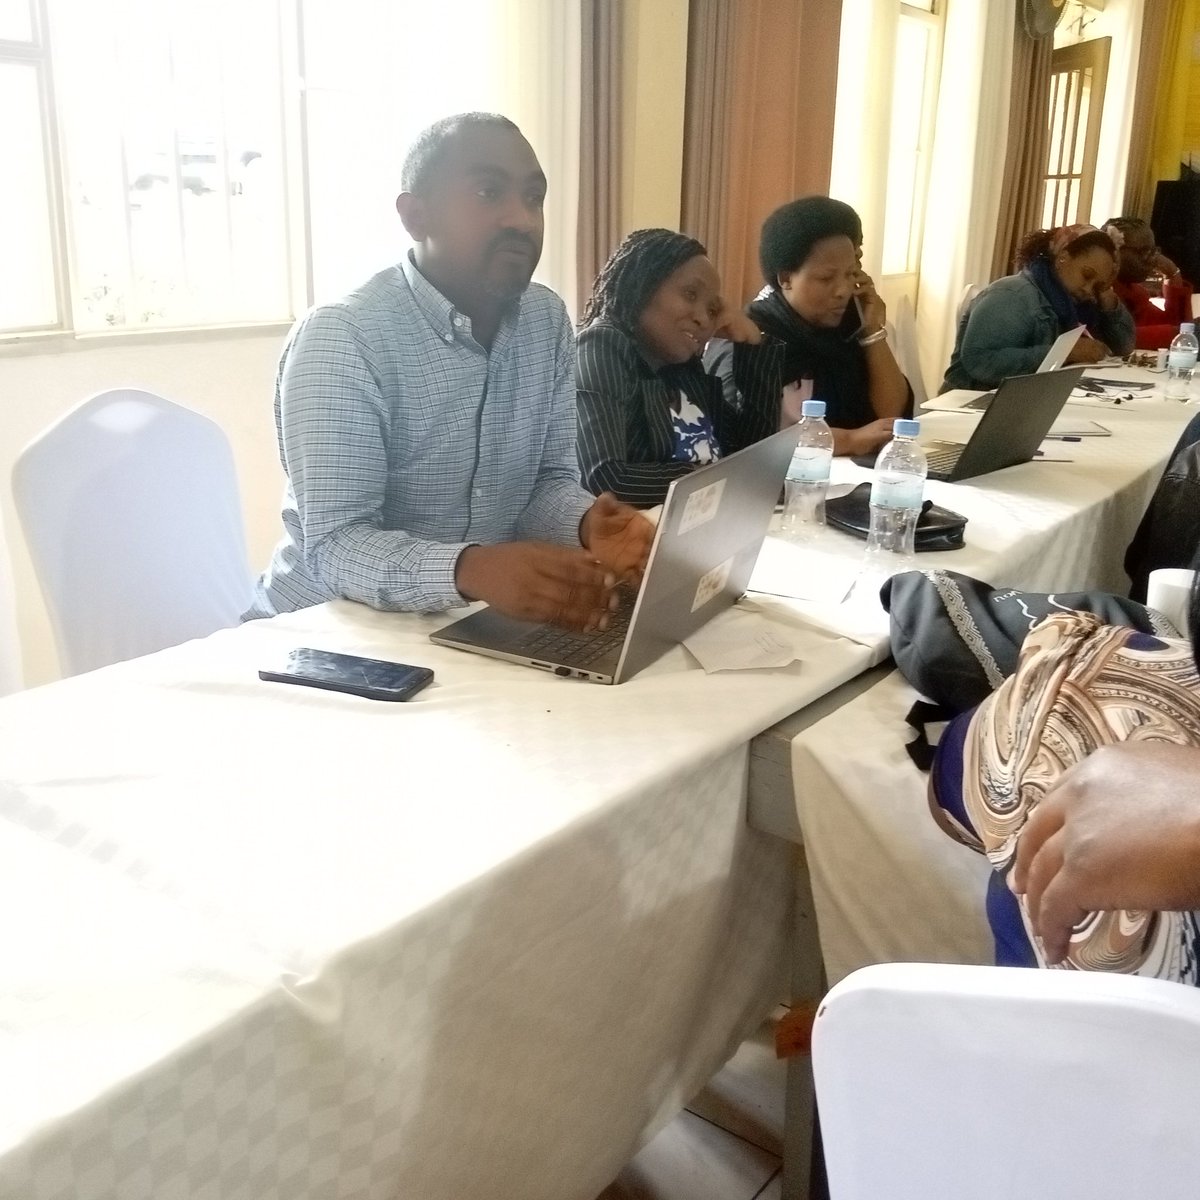 After presentation from groups, participants are sharing insights on challenges faced while investigating medical malpractice cases and the way forward